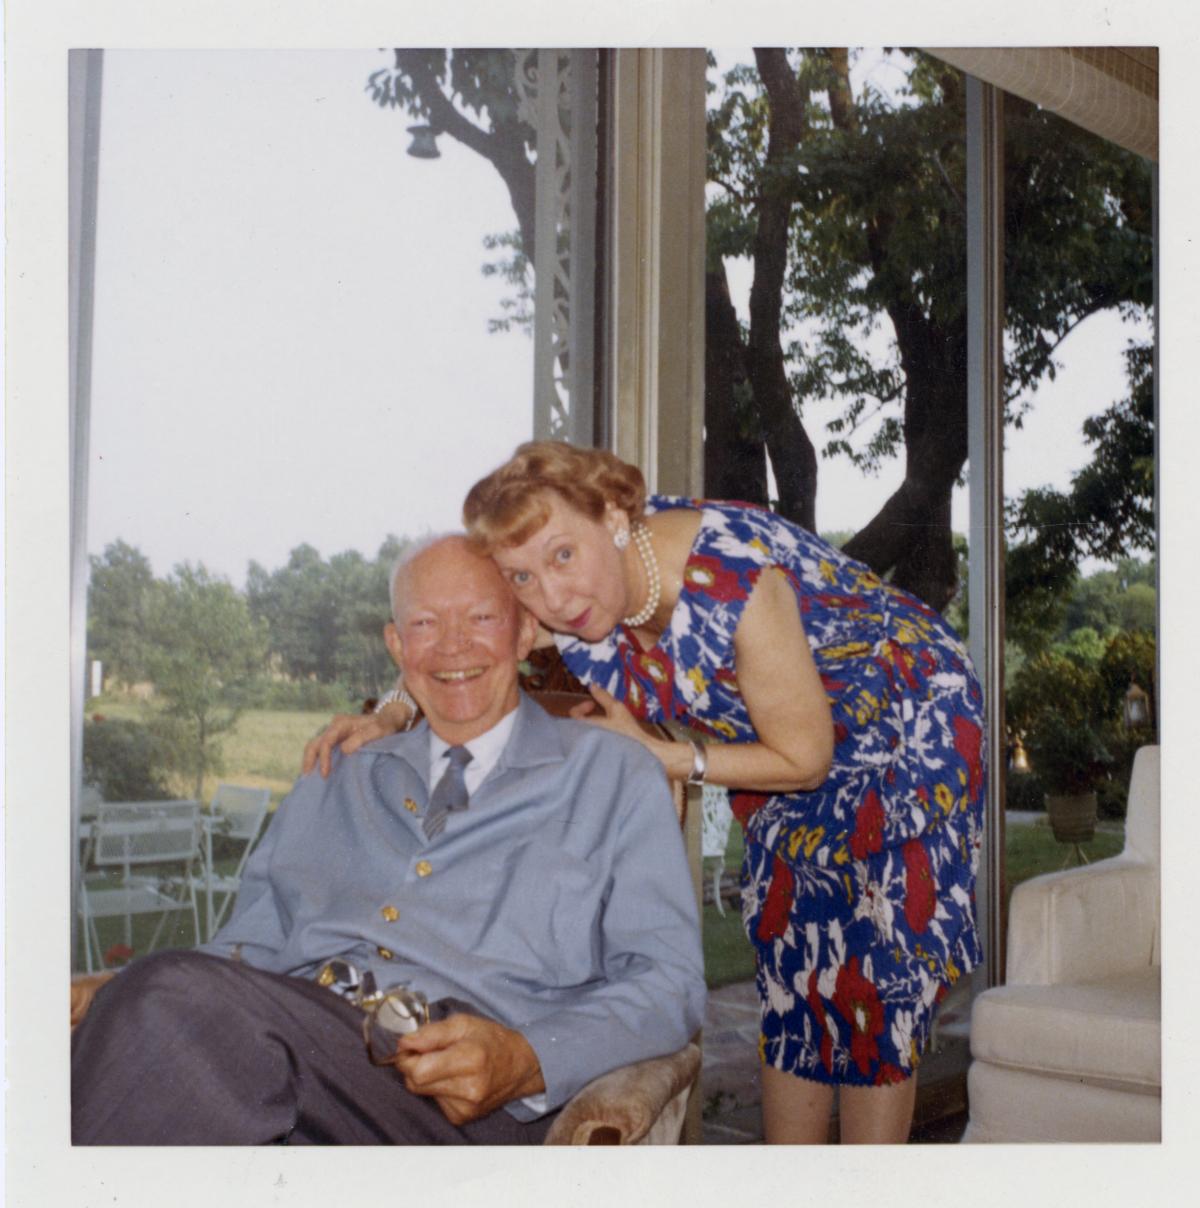 Ike and Mamie at their Gettysburg home.